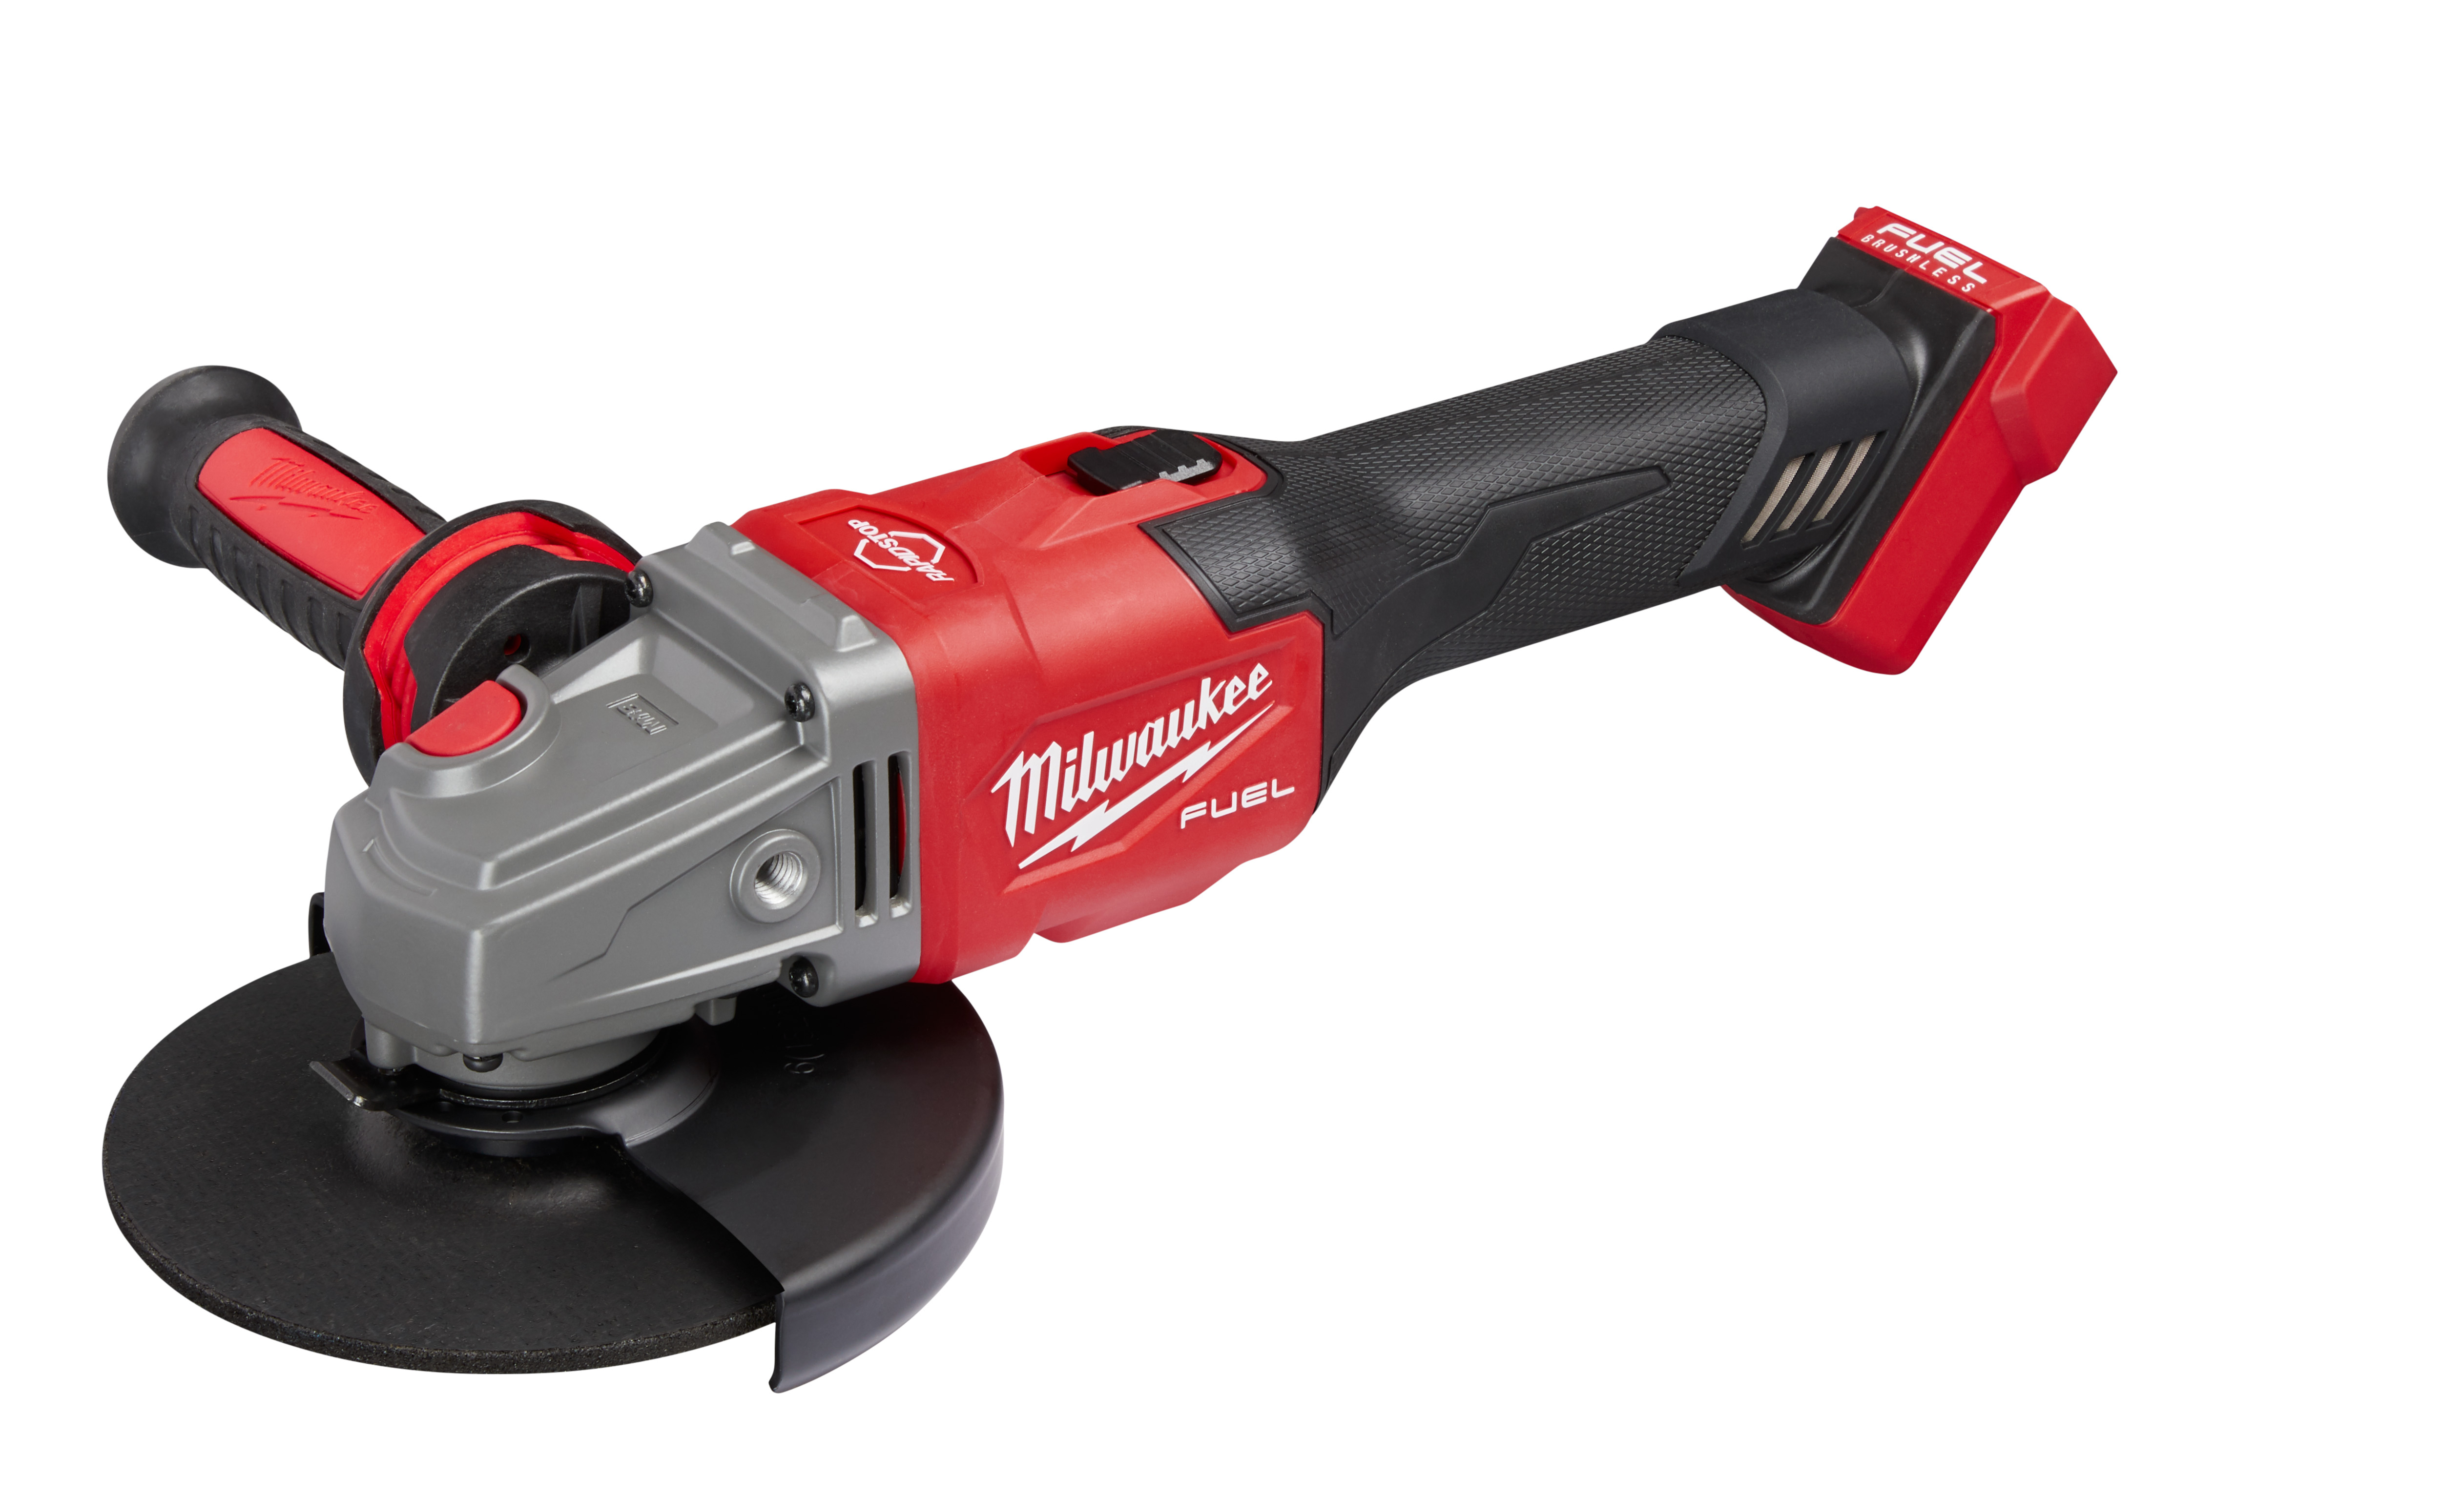 M18 FUEL 18-Volt  Brushless 4-1/2 in./6 in.Grinder with Slide Switch with Lock On - 2981-20